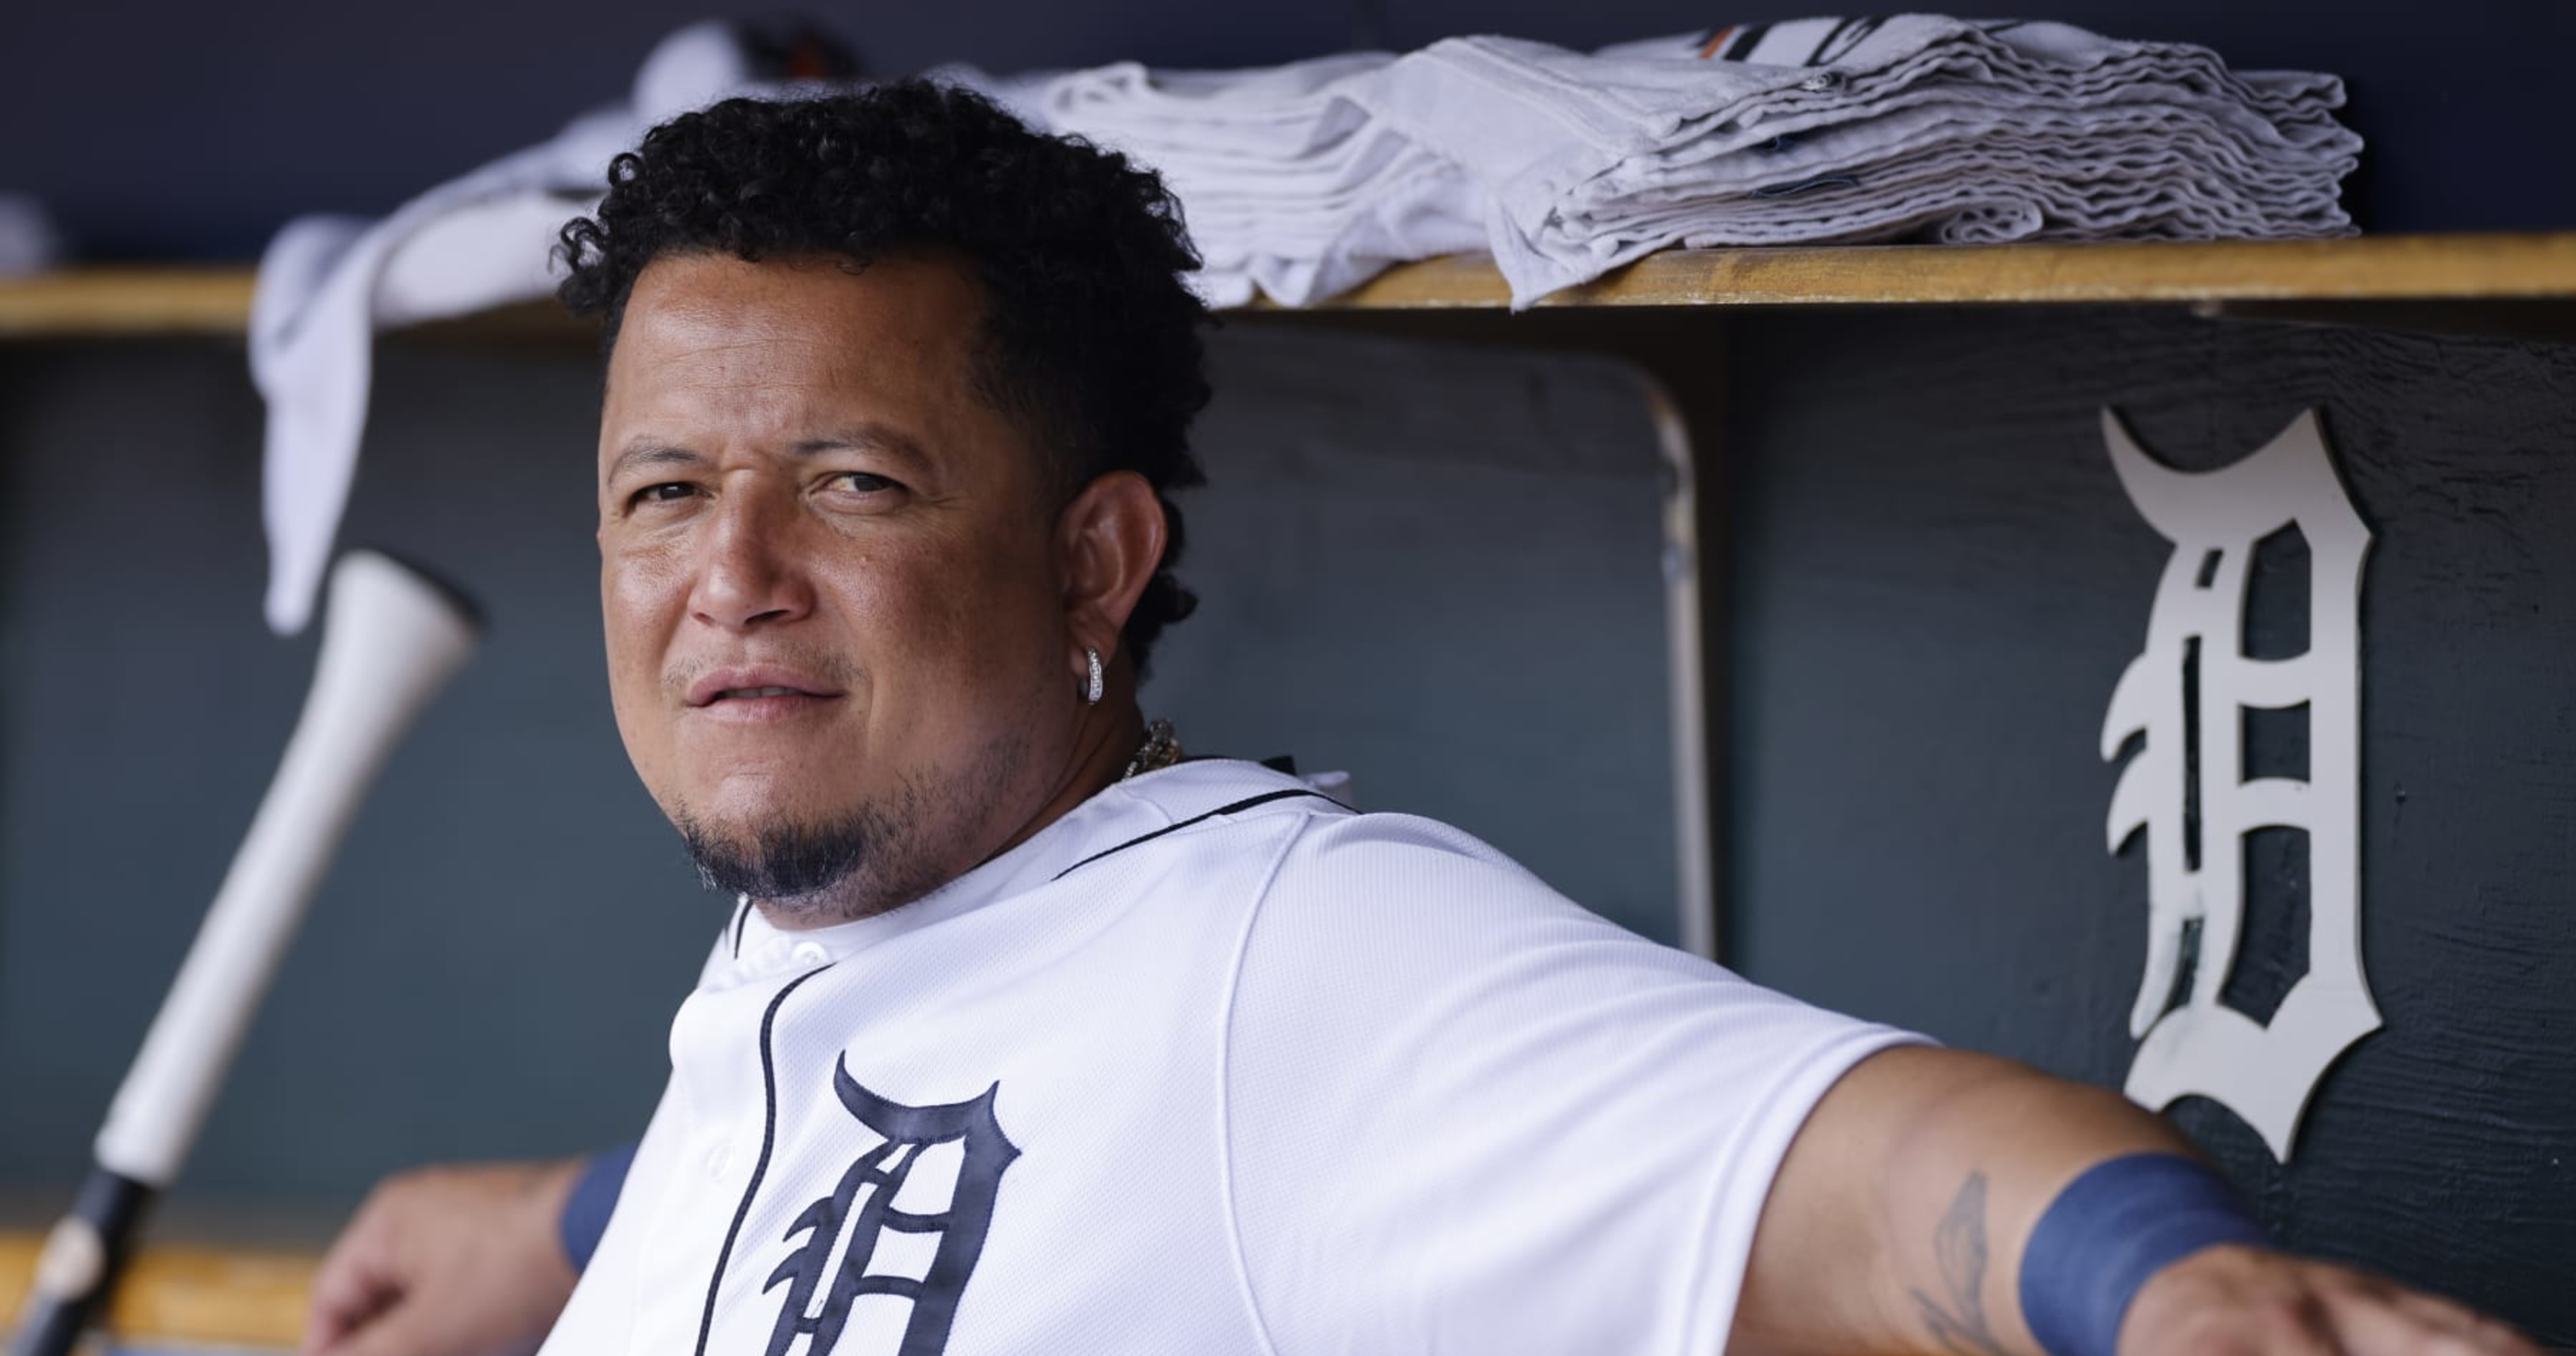 Tigers' Miguel Cabrera Intends to Play Out Contract, Retire After 2023 Season